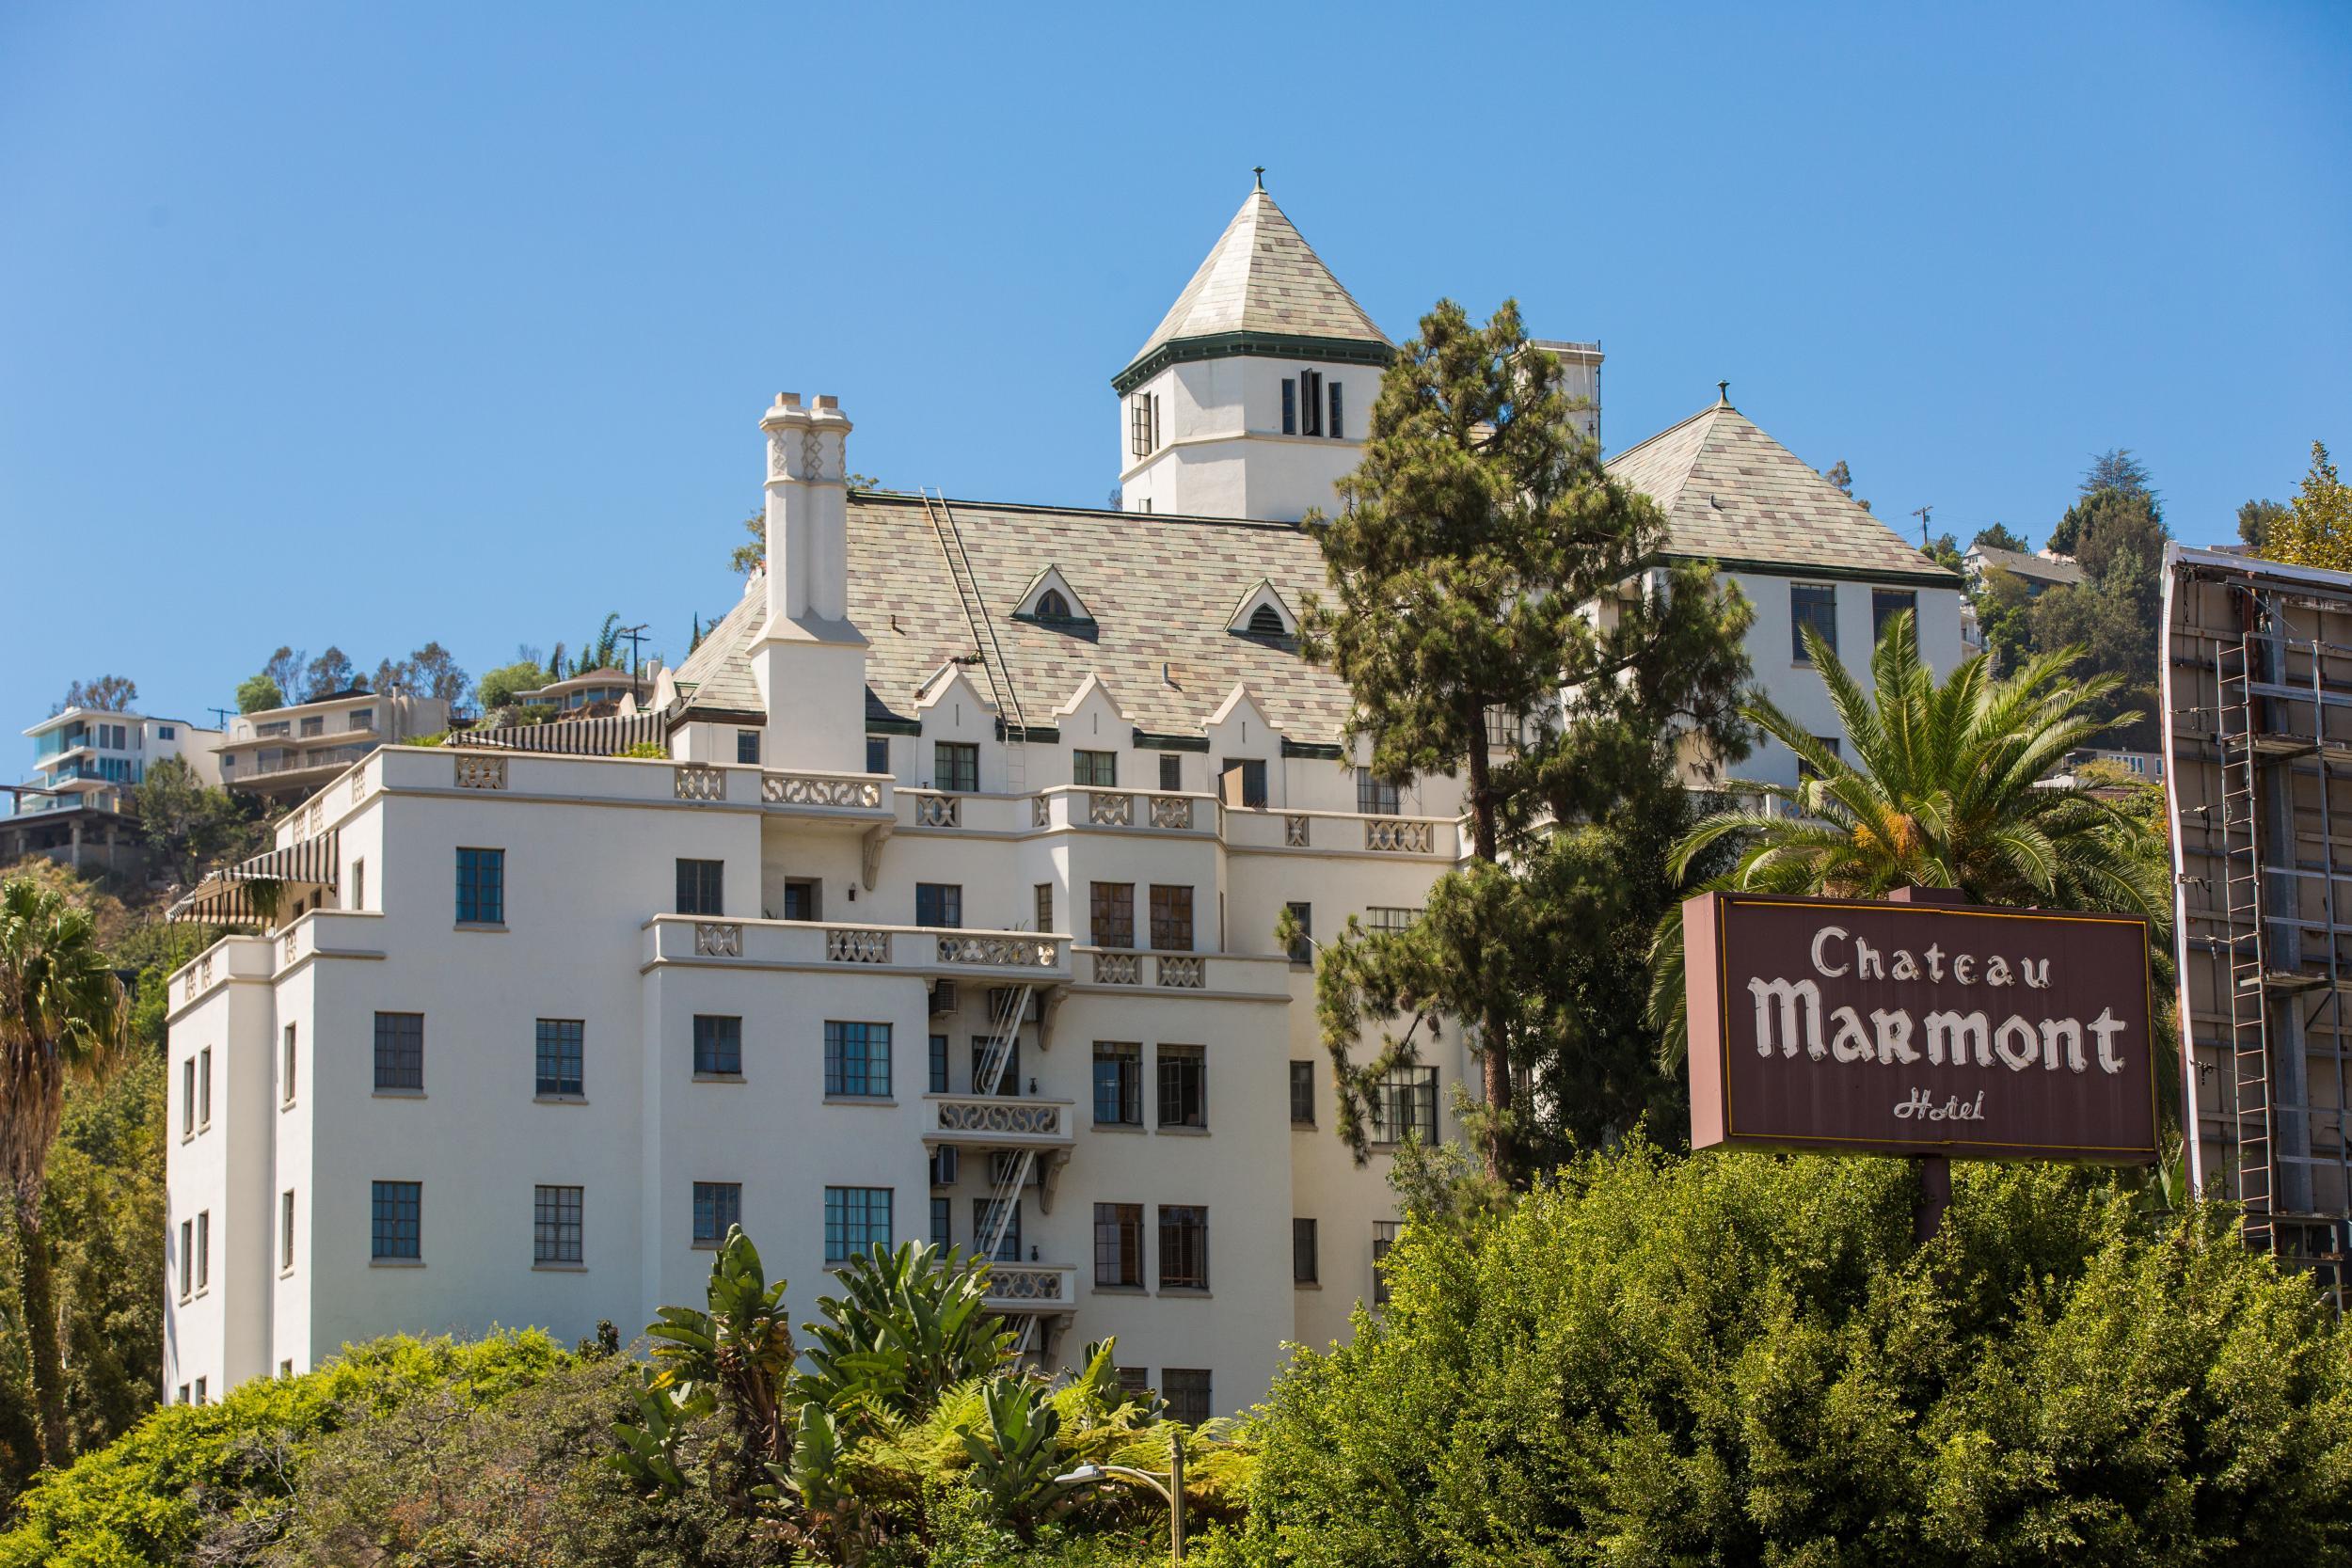 &#13;
The infamous Chateau Marmont is less impenetrable than you’d think &#13;